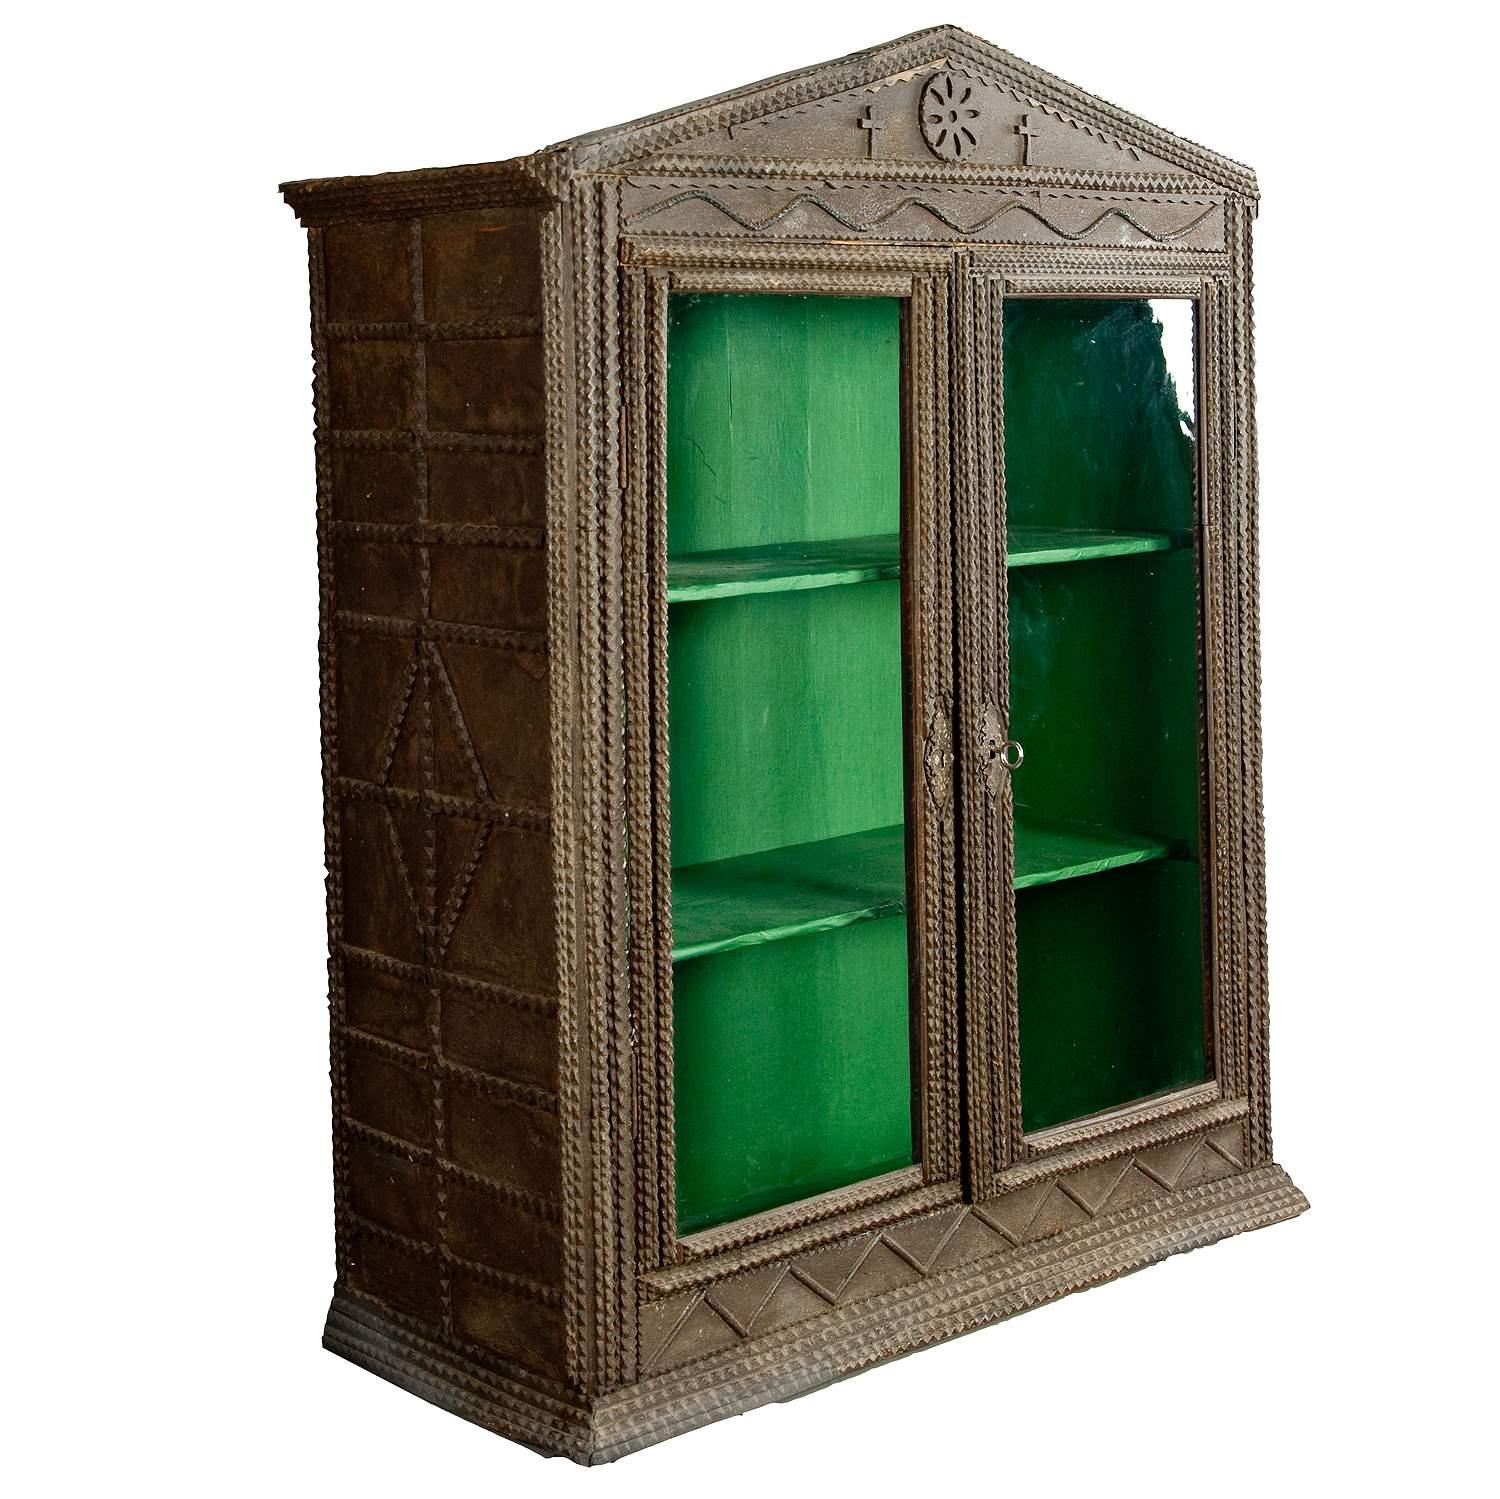 Antique Tramp Art Cabinet ca. 1900

The wooden tramp art cabinet is decorated with rich notch carvings. The inside is coated with green paper. It was executed in Germany ca. 1900.

Measures:
Width: 31.5